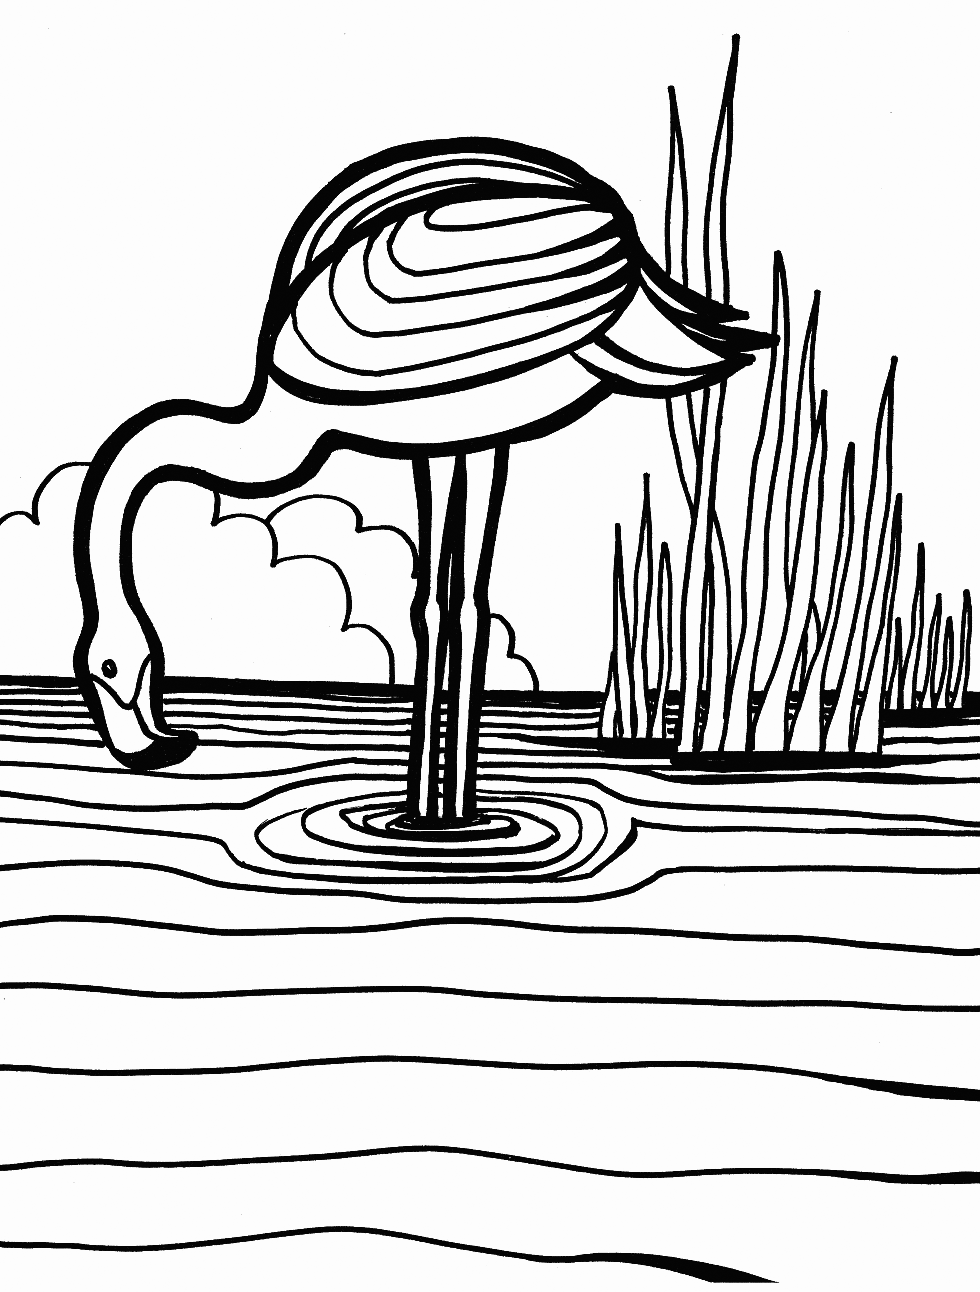 Flamingo Coloring Pages - Best Coloring Pages For Kids